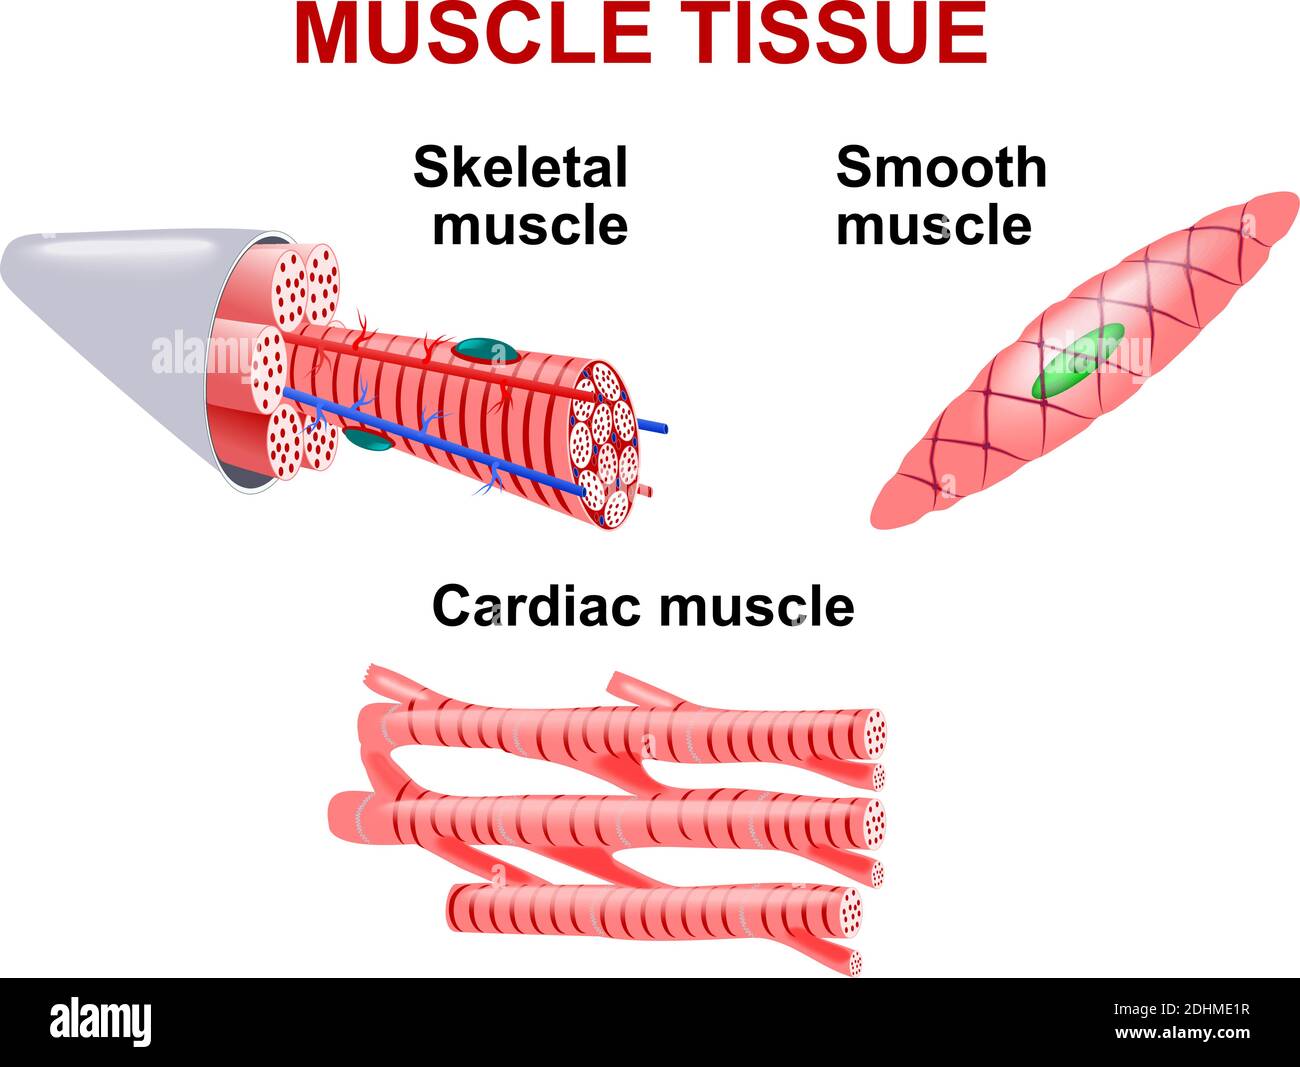 Types of muscle tissue. Skeletal muscle, smooth muscle, cardiac muscle. Stock Vector